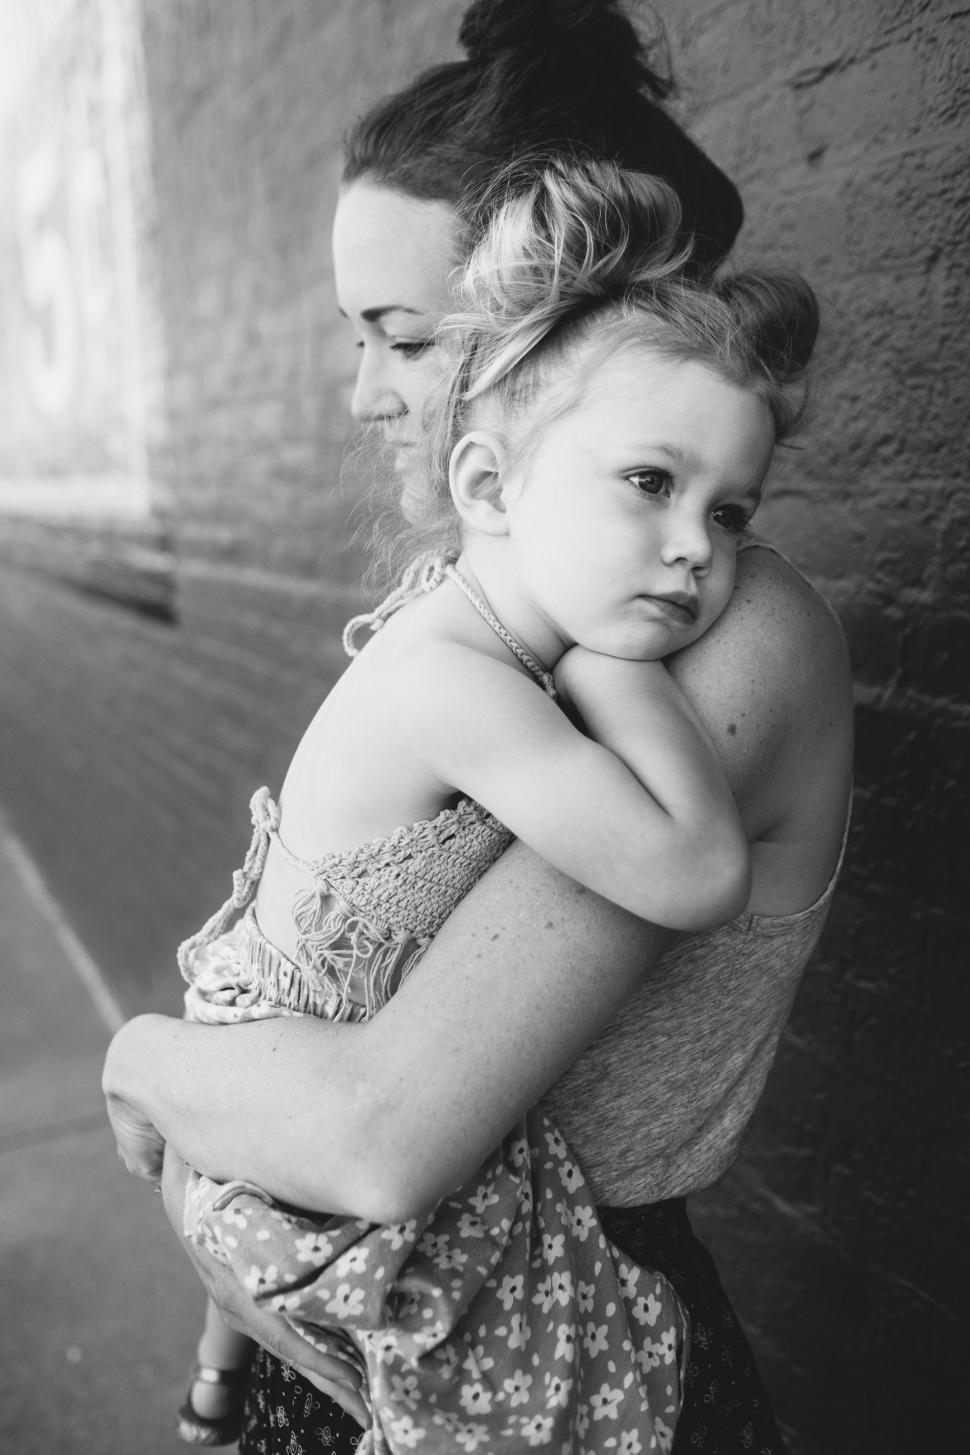 Free Image of Woman Holding Little Girl in Her Arms 